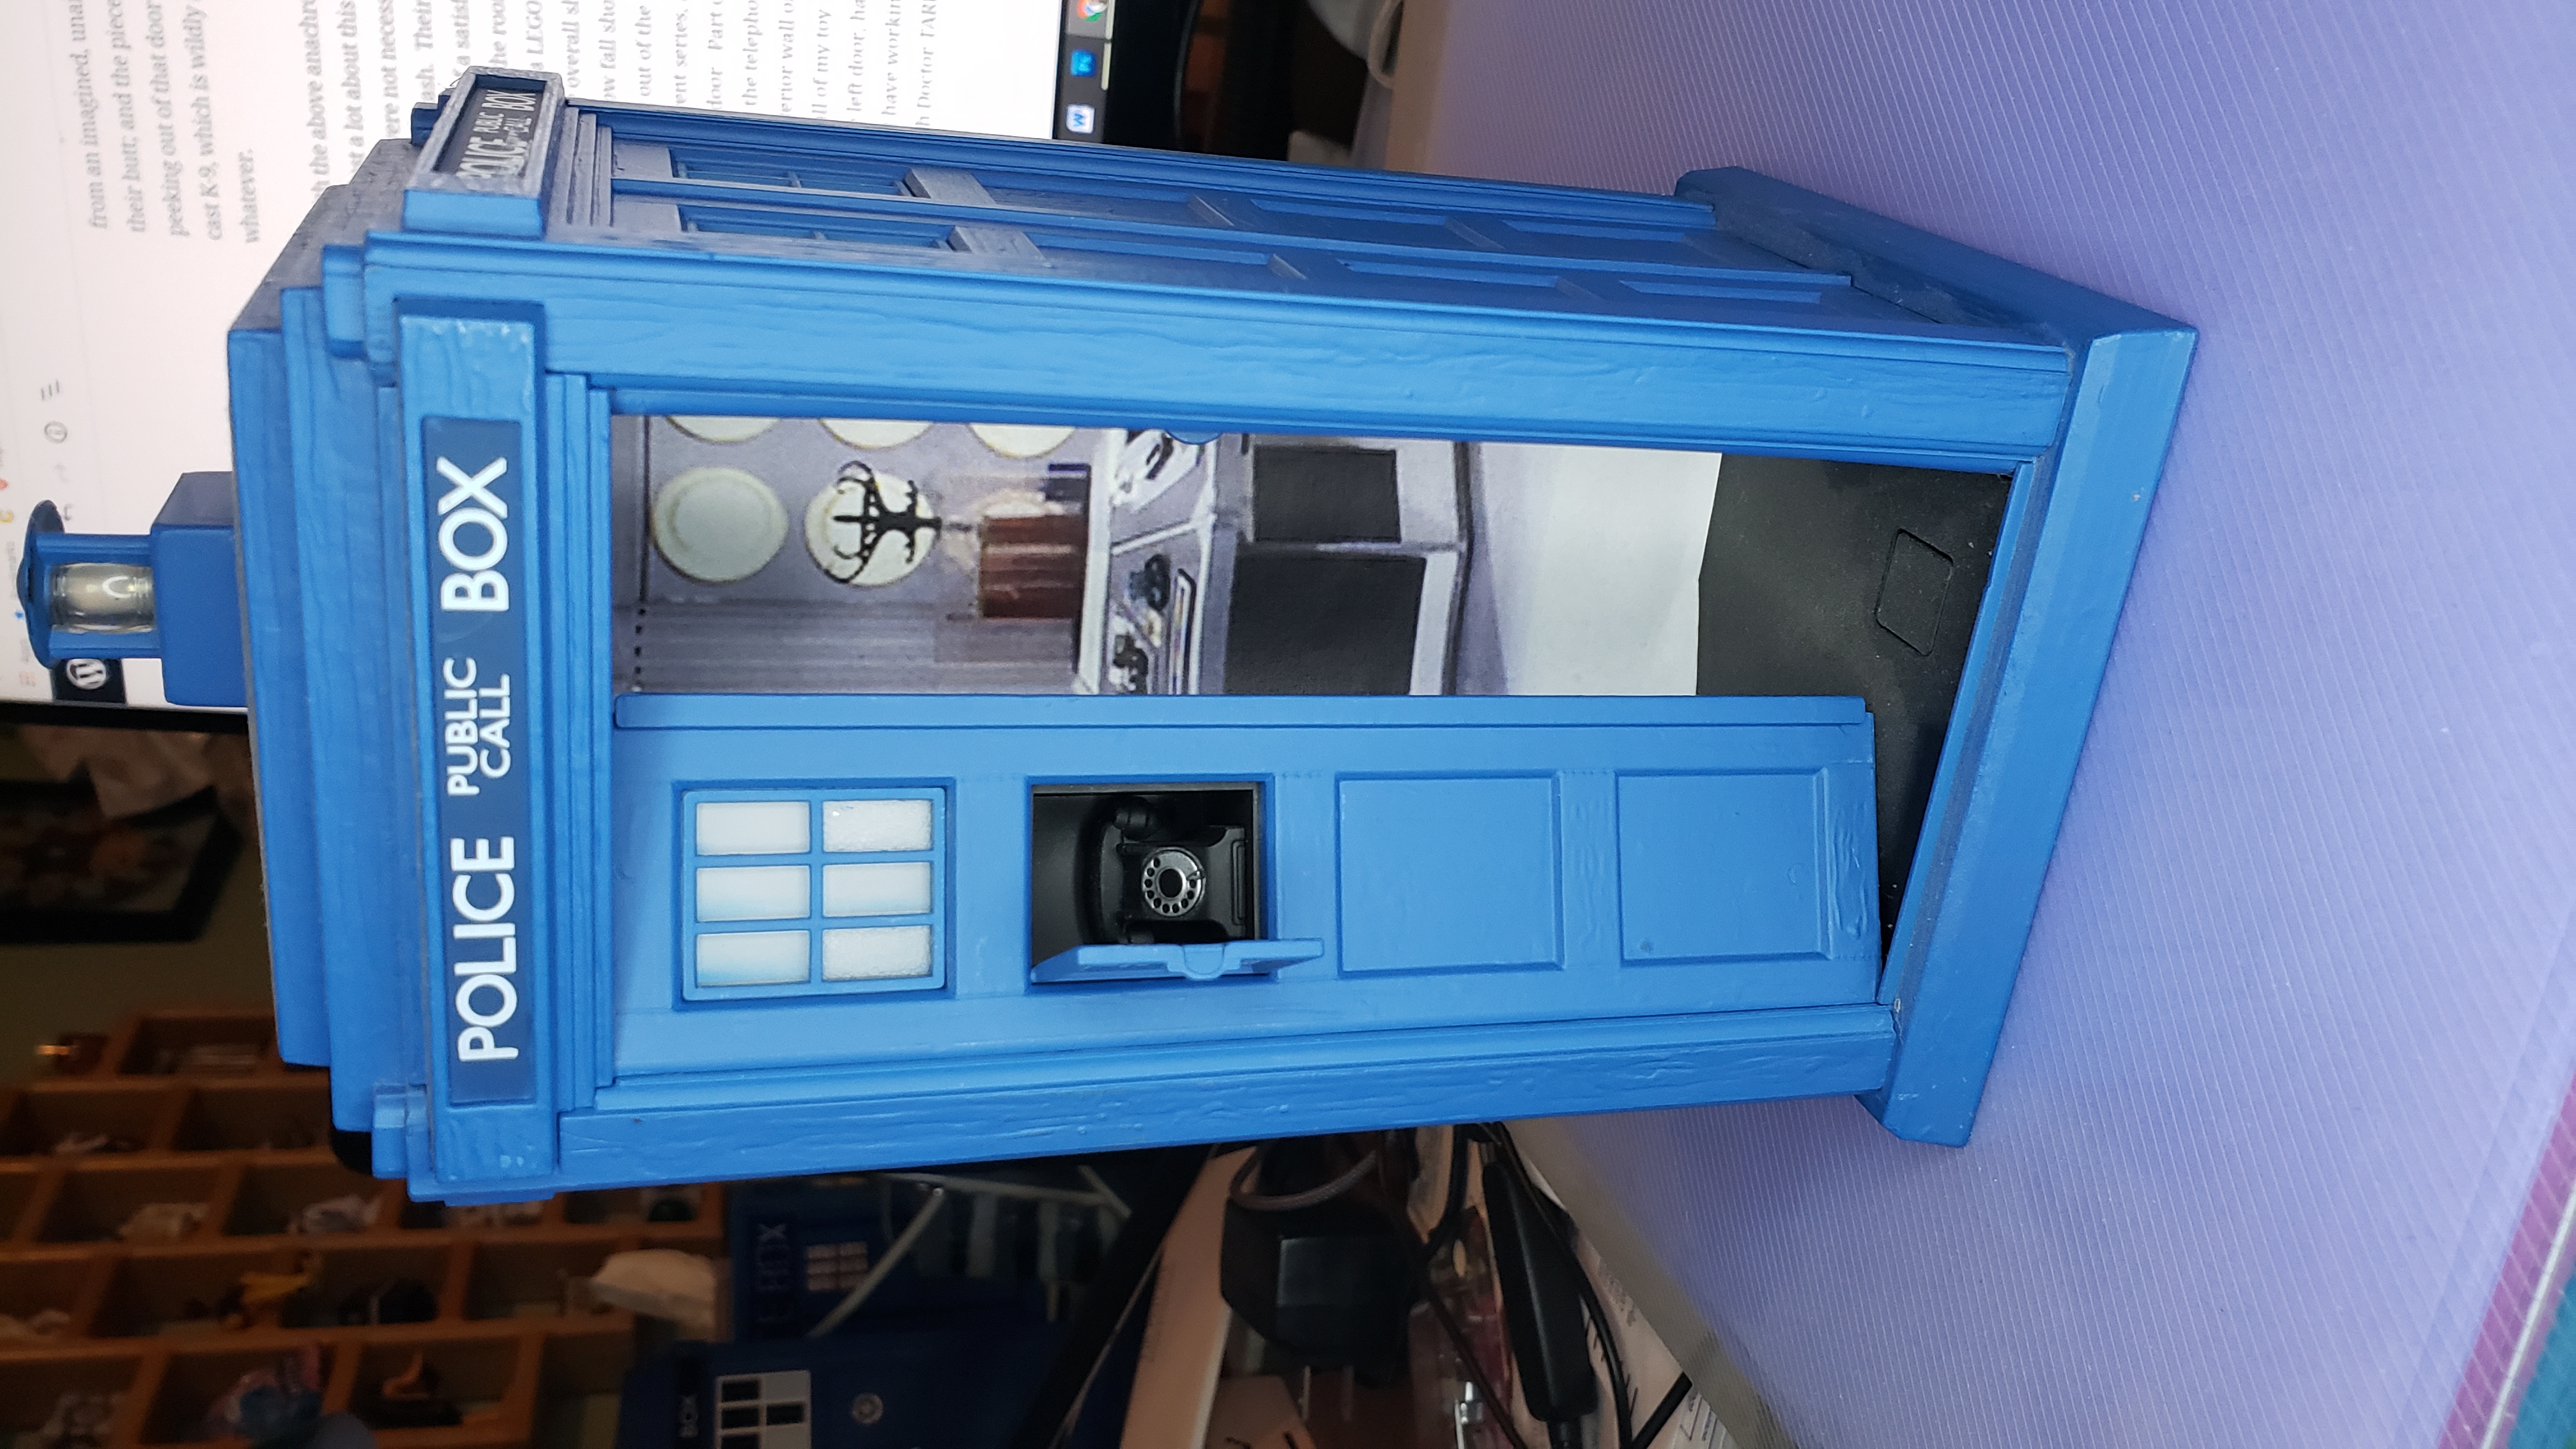 LOOTCRATE PAPER FIGS TARDIS DOCTOR WHO POLICE BOX CRAFT ART DIY T.A.R.D.I.S 